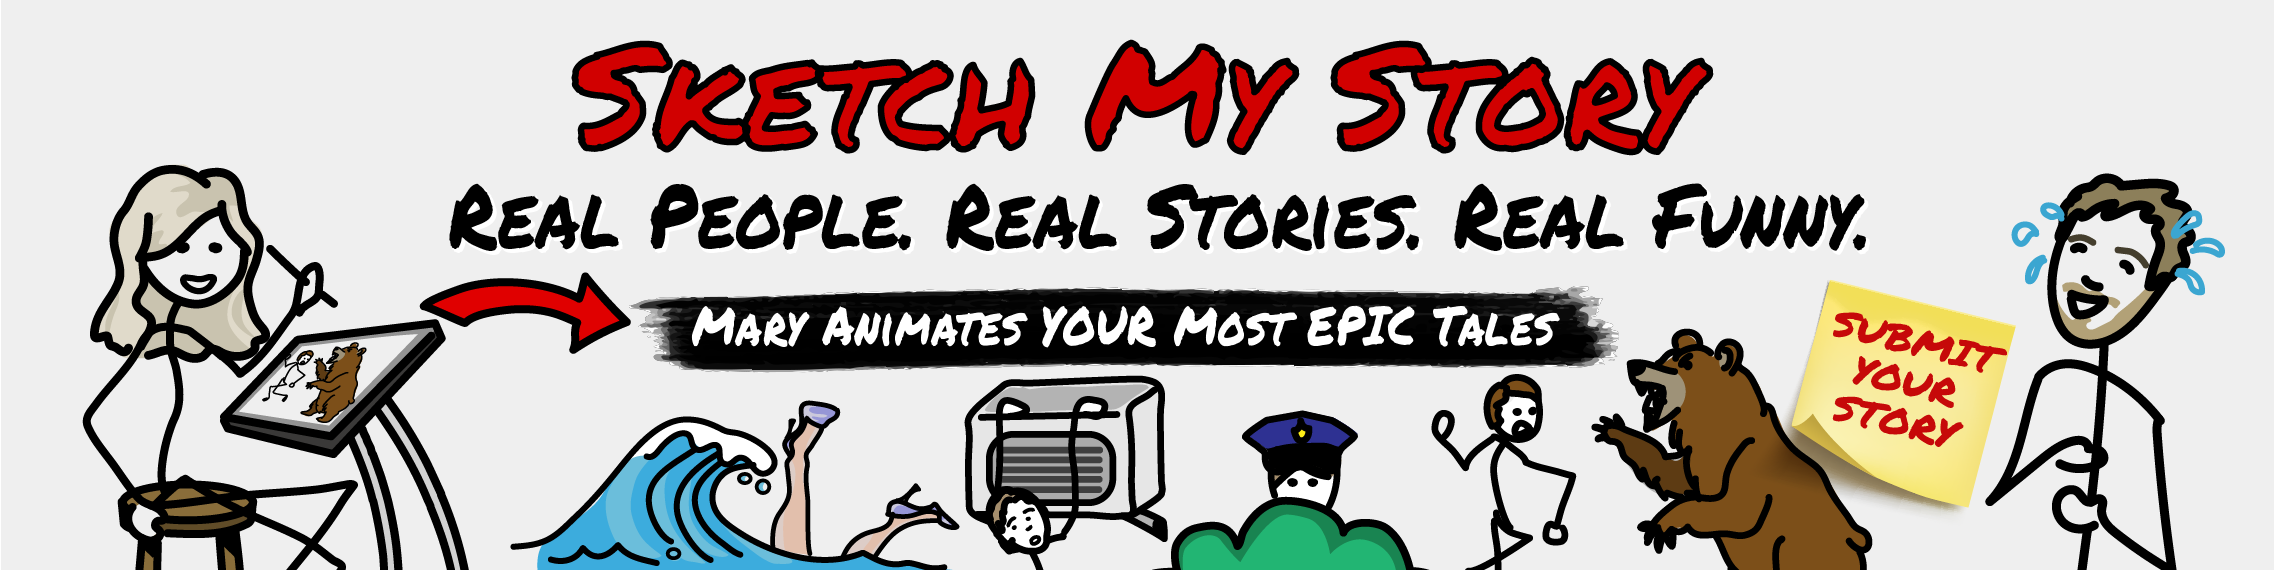 Sketch My Story banner with subtitles "Real People. real stories. real funny" "Mary animates your most epic tales" "Submit your story"